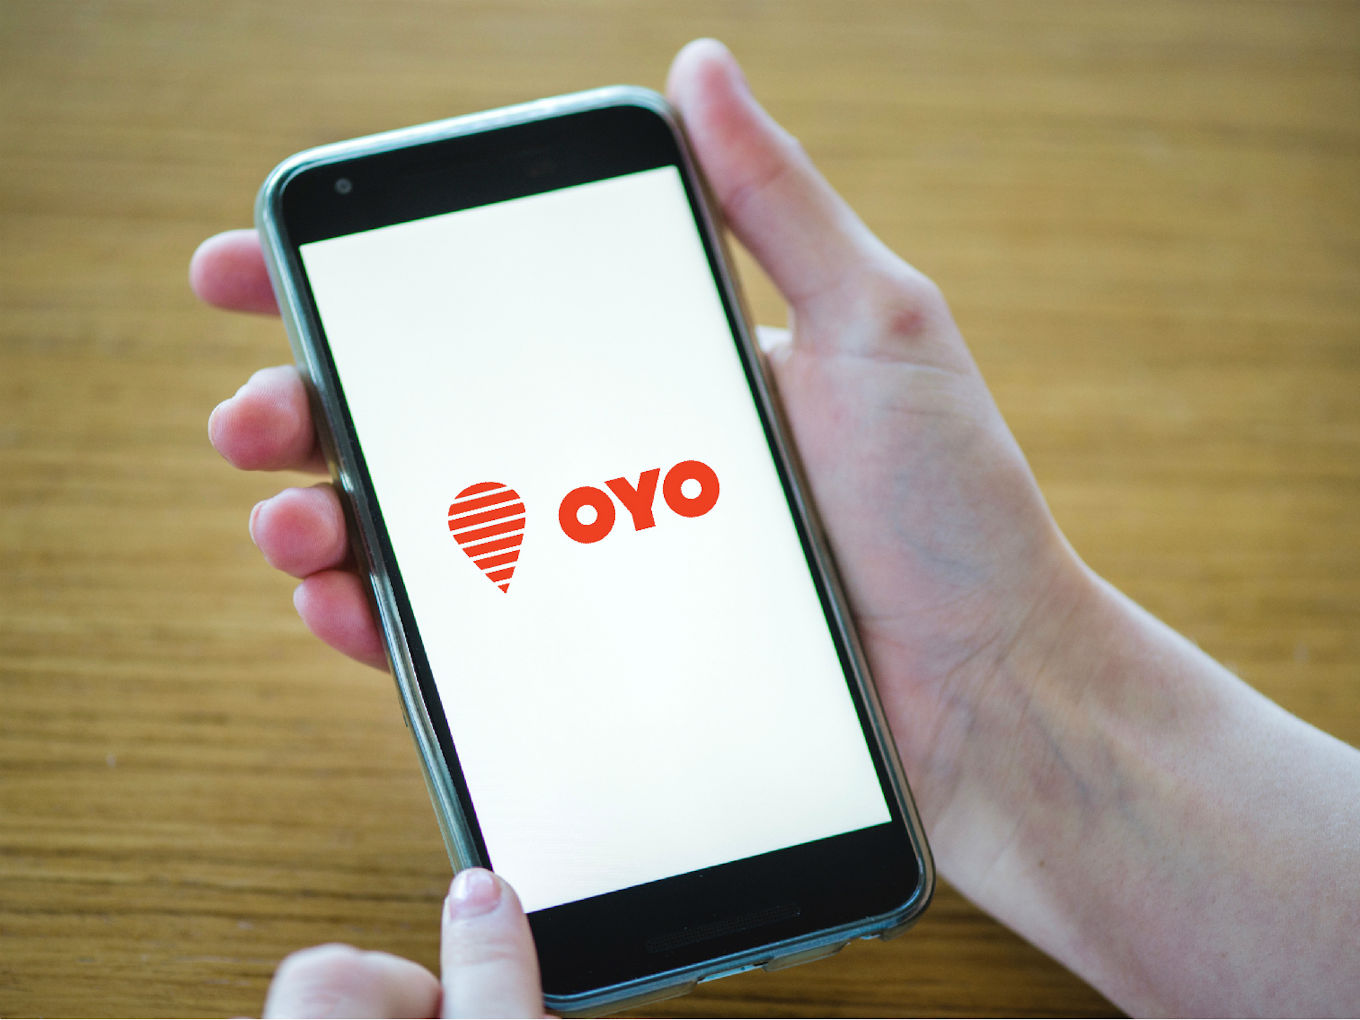 Oyo Pulls Back On Thousands Of Hotel Rooms, Dozens Of Cities: Report